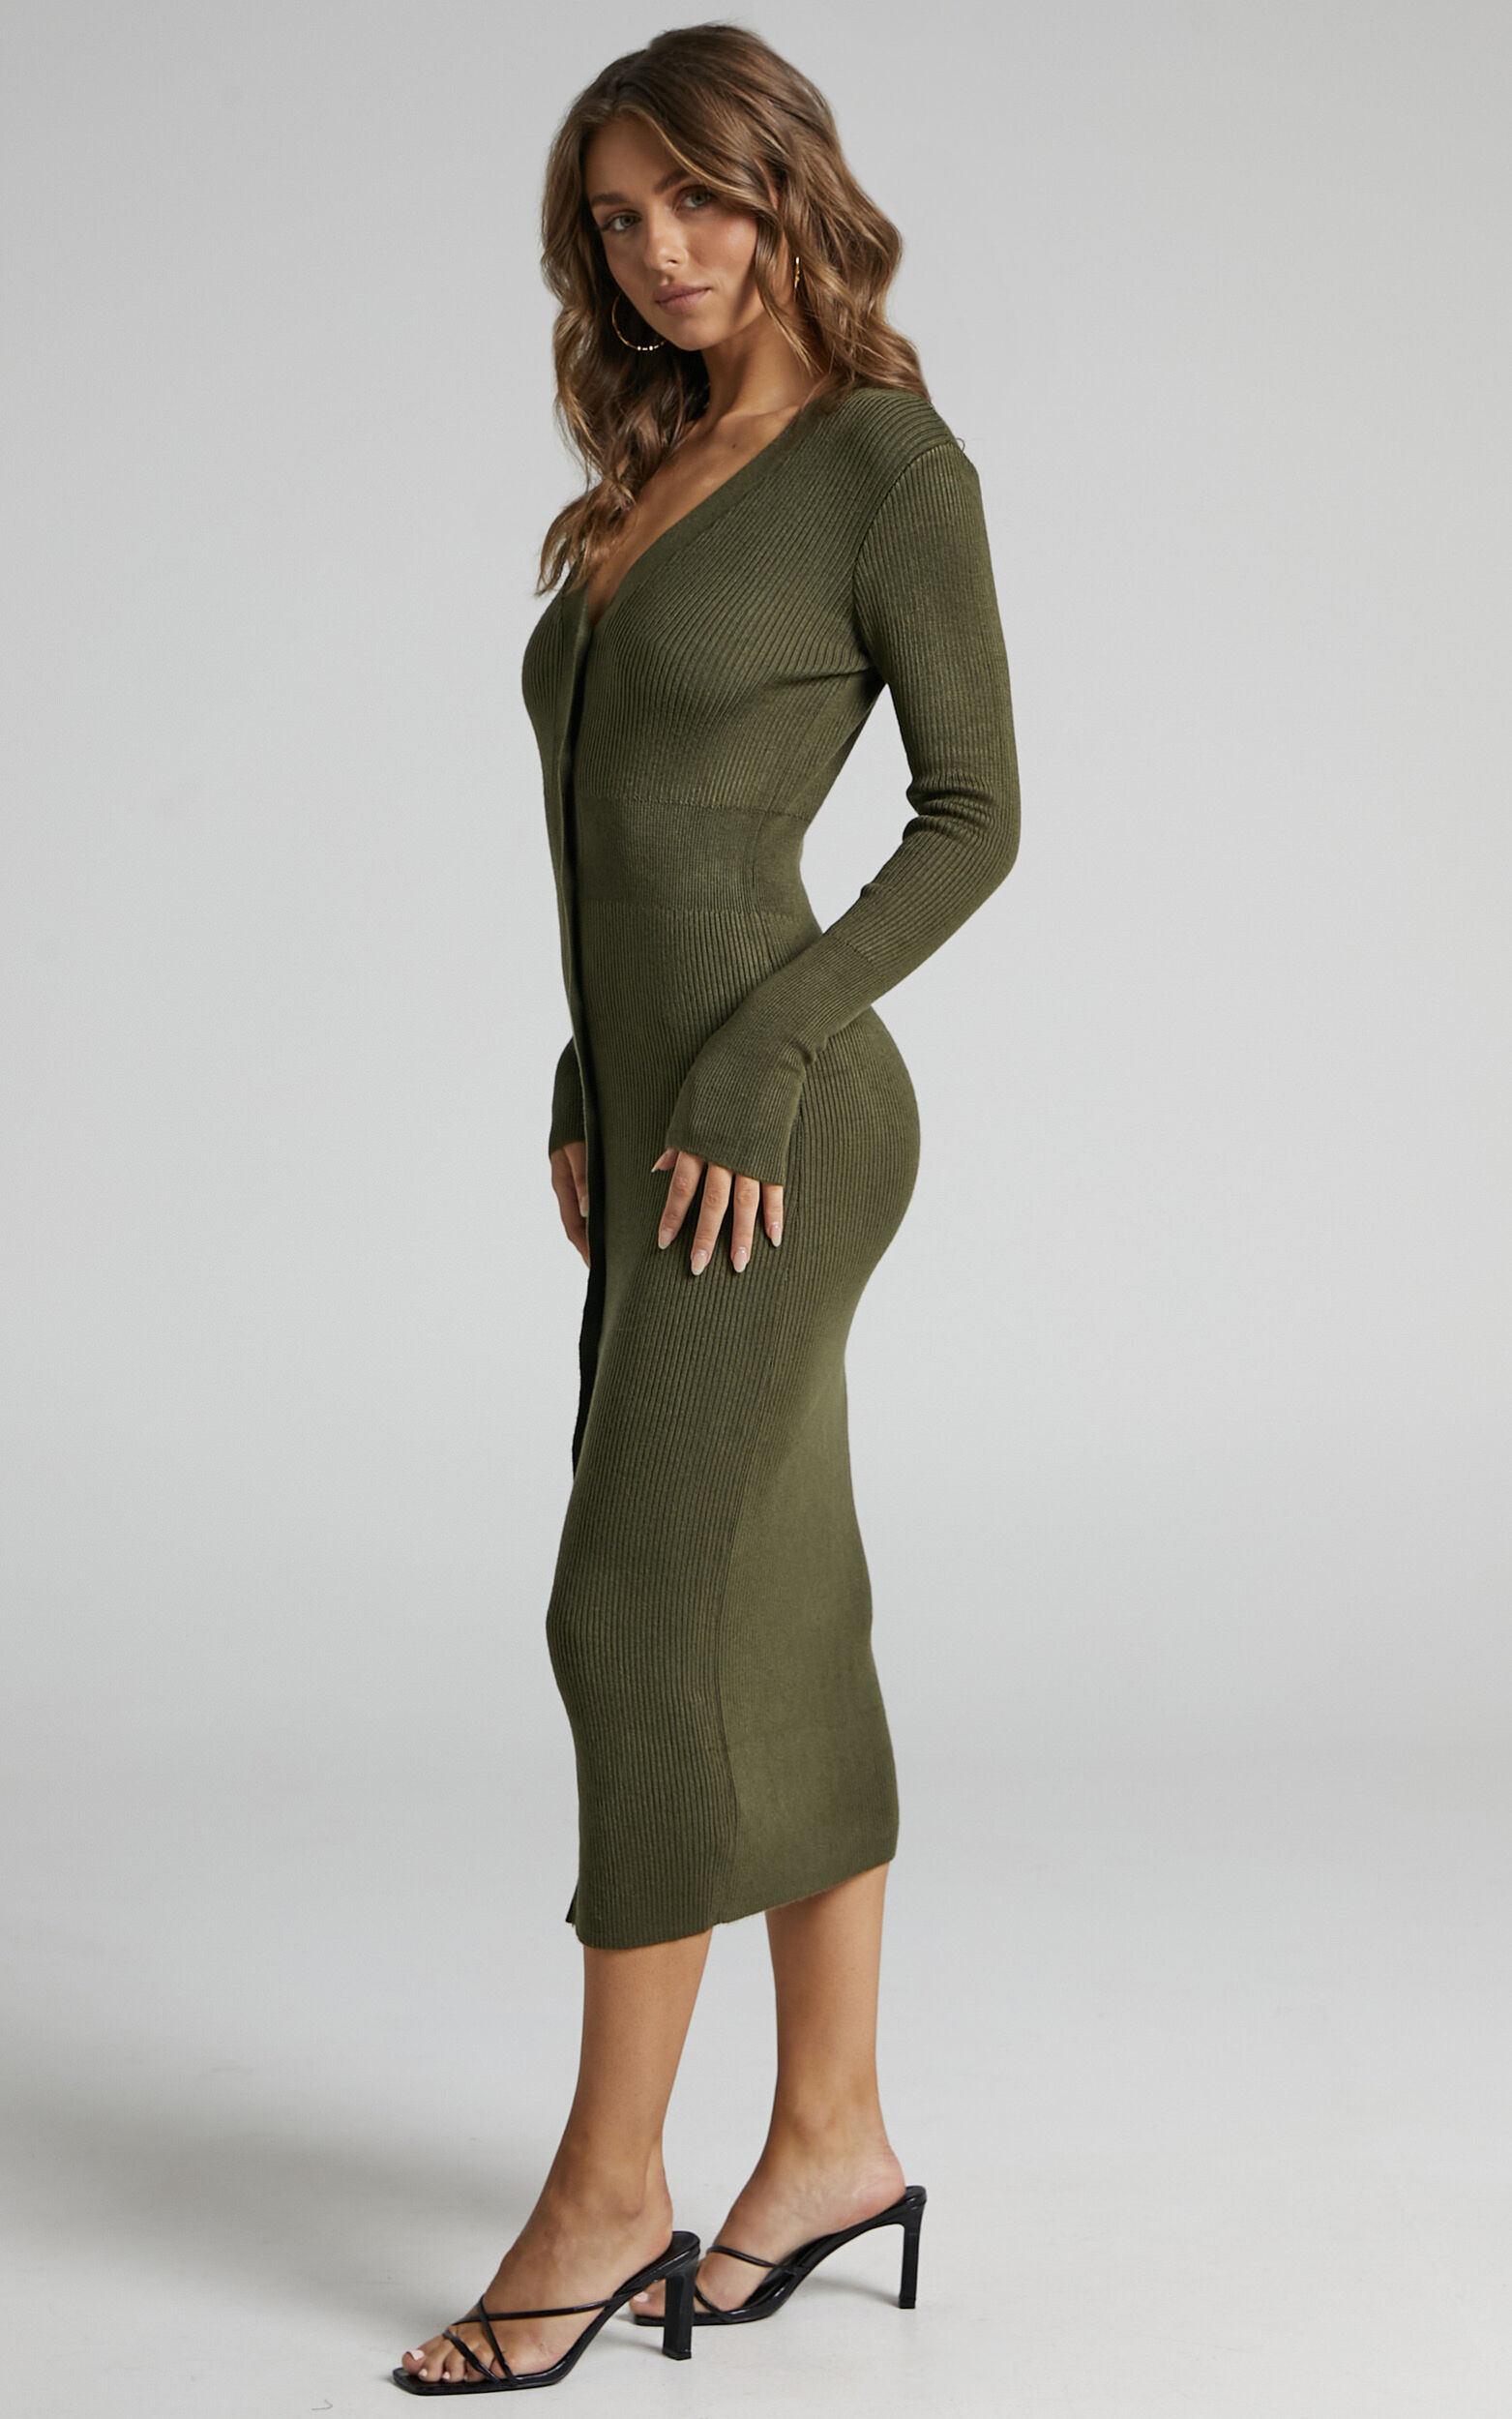 Leahanna Midi Dress - Button Front Knit Dress in Olive